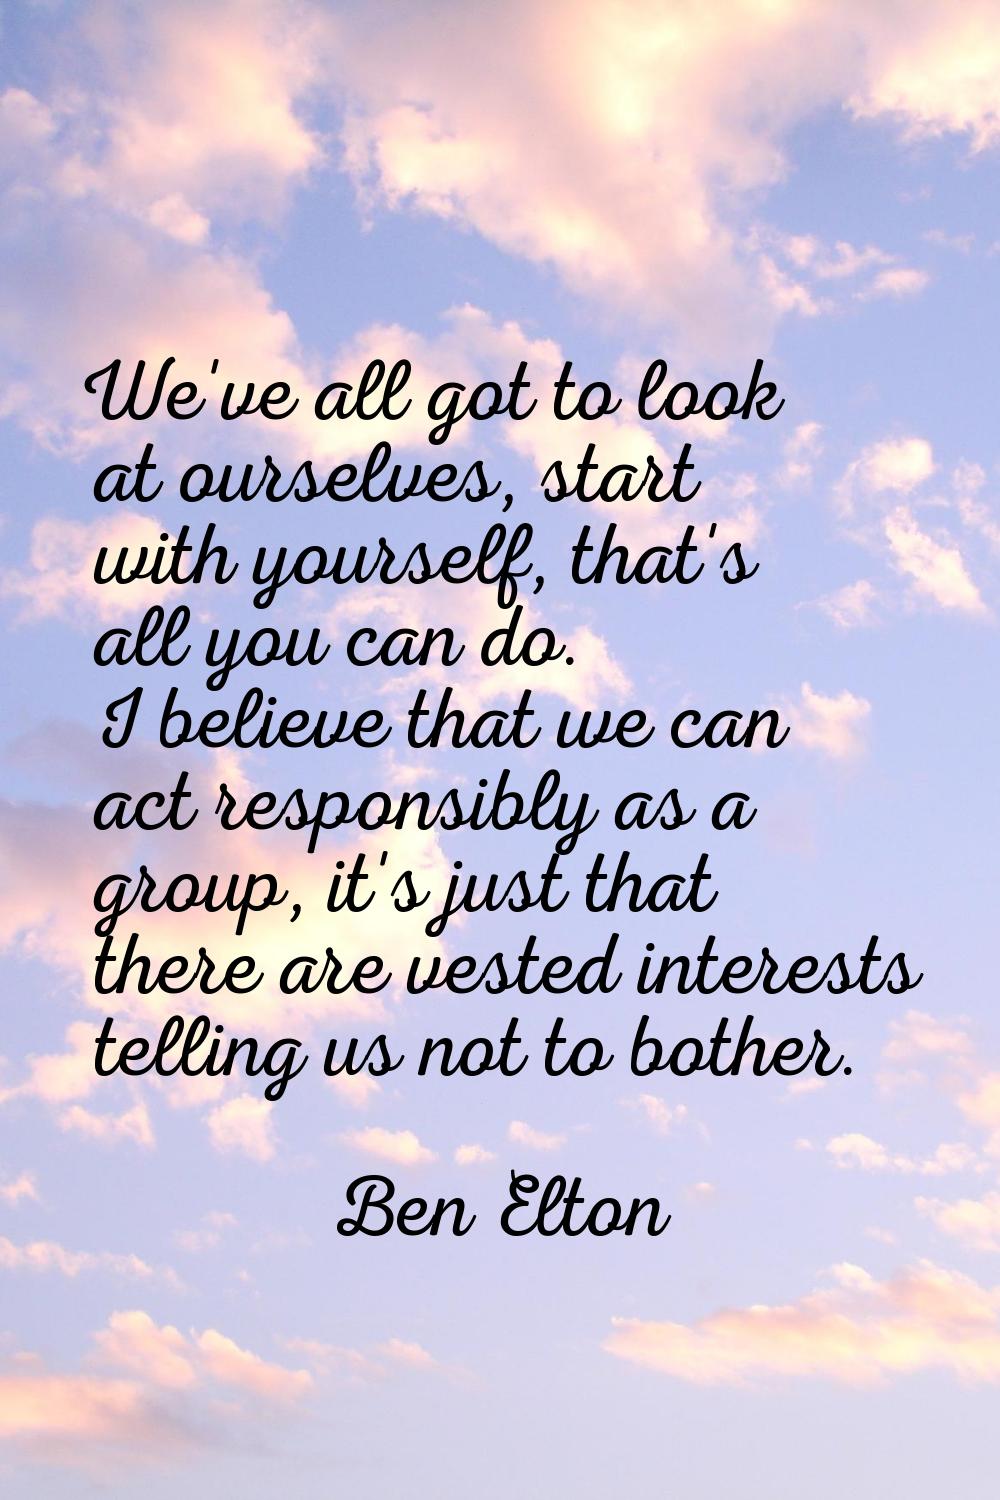 We've all got to look at ourselves, start with yourself, that's all you can do. I believe that we c